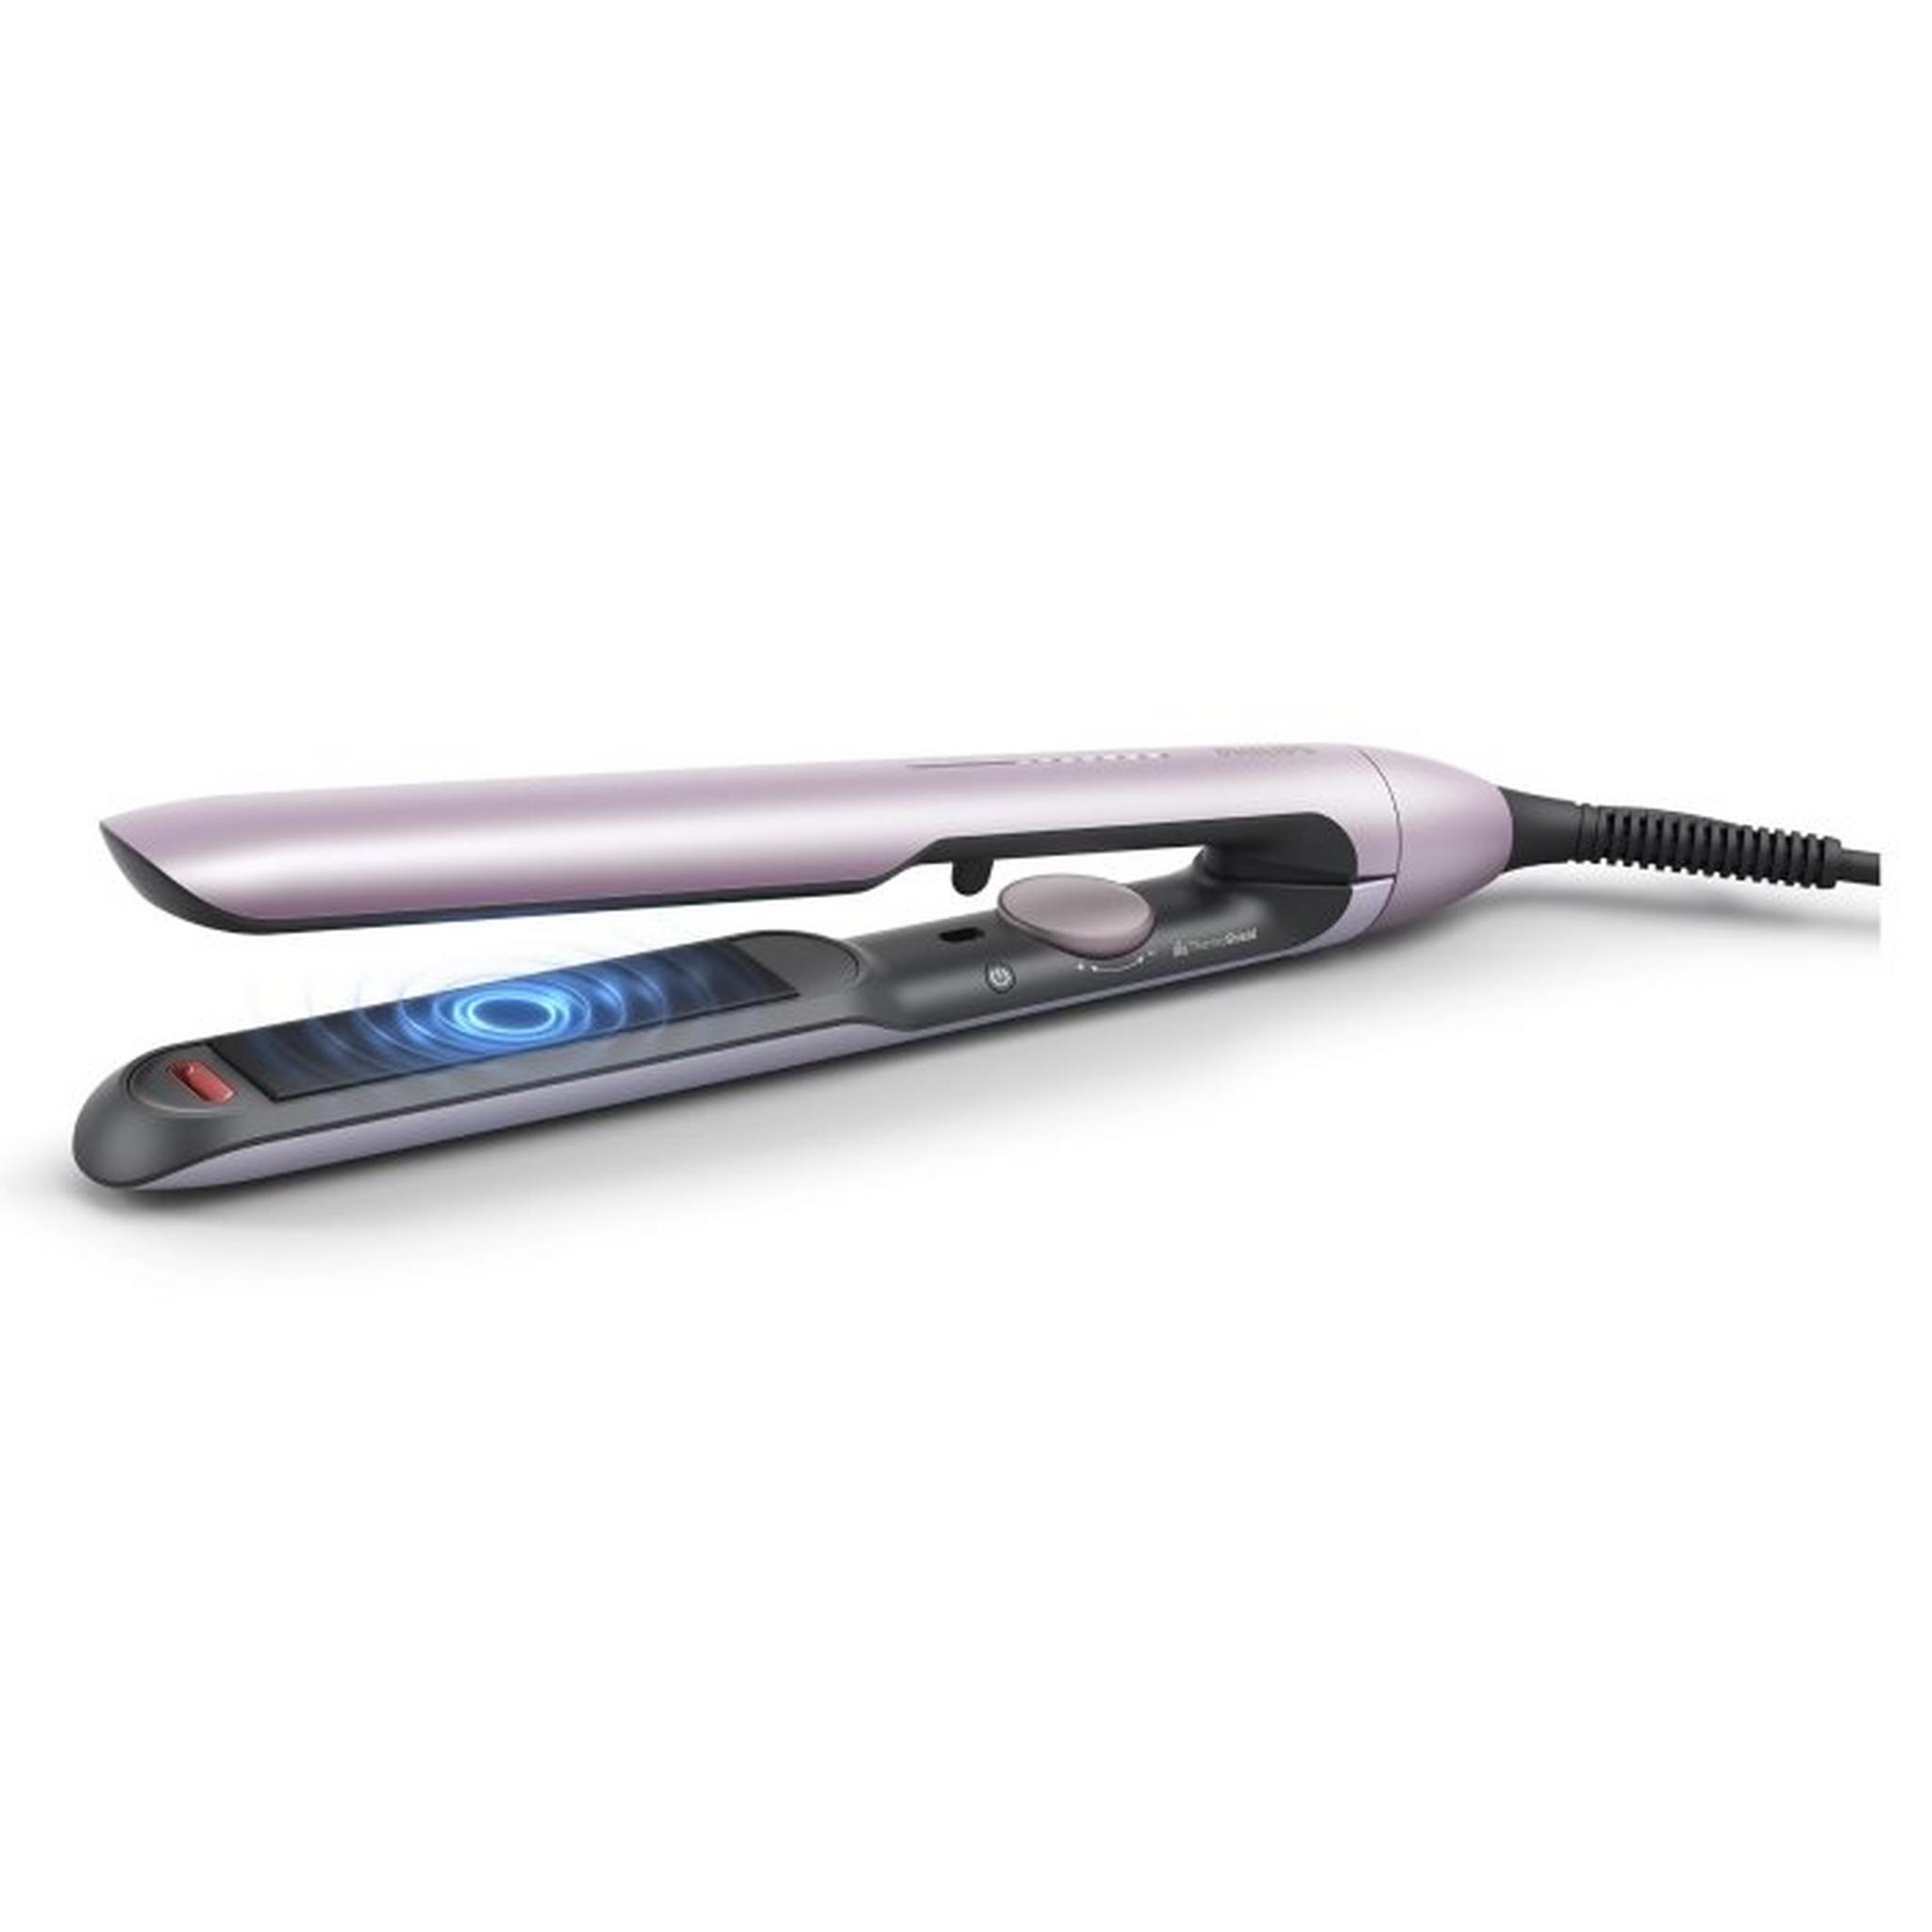 Philips 5000 Series Hair Straightener with Heat Protection and 2X Ionic Care, 12 Heat Settings, BHS530/03 - Metallic Pink